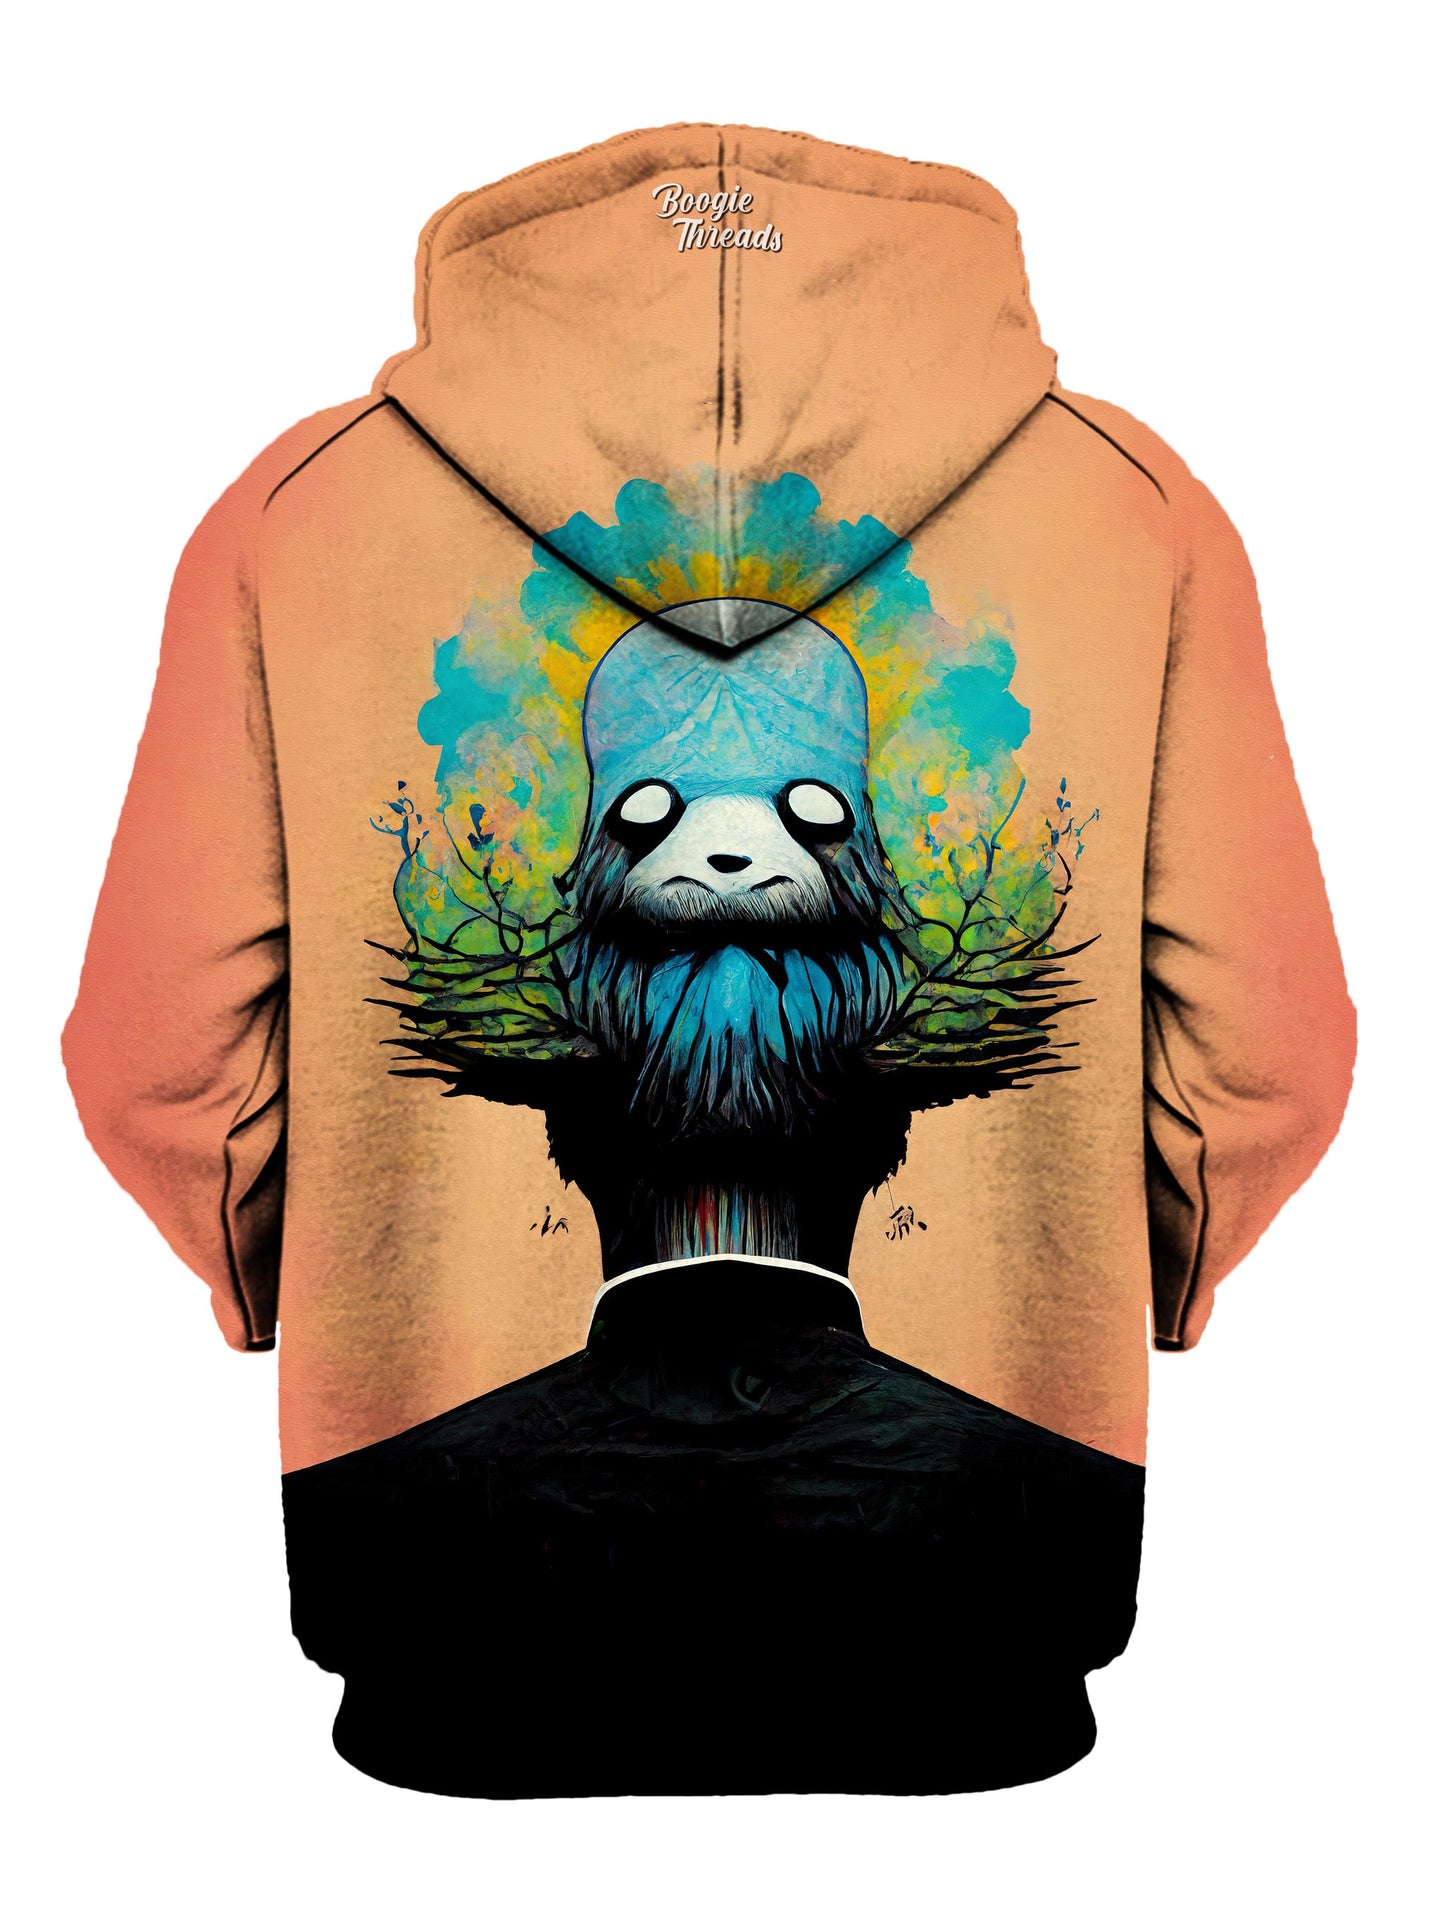 trippy alex pardee artwork printed on a pullover hoodie - bright blue and orange